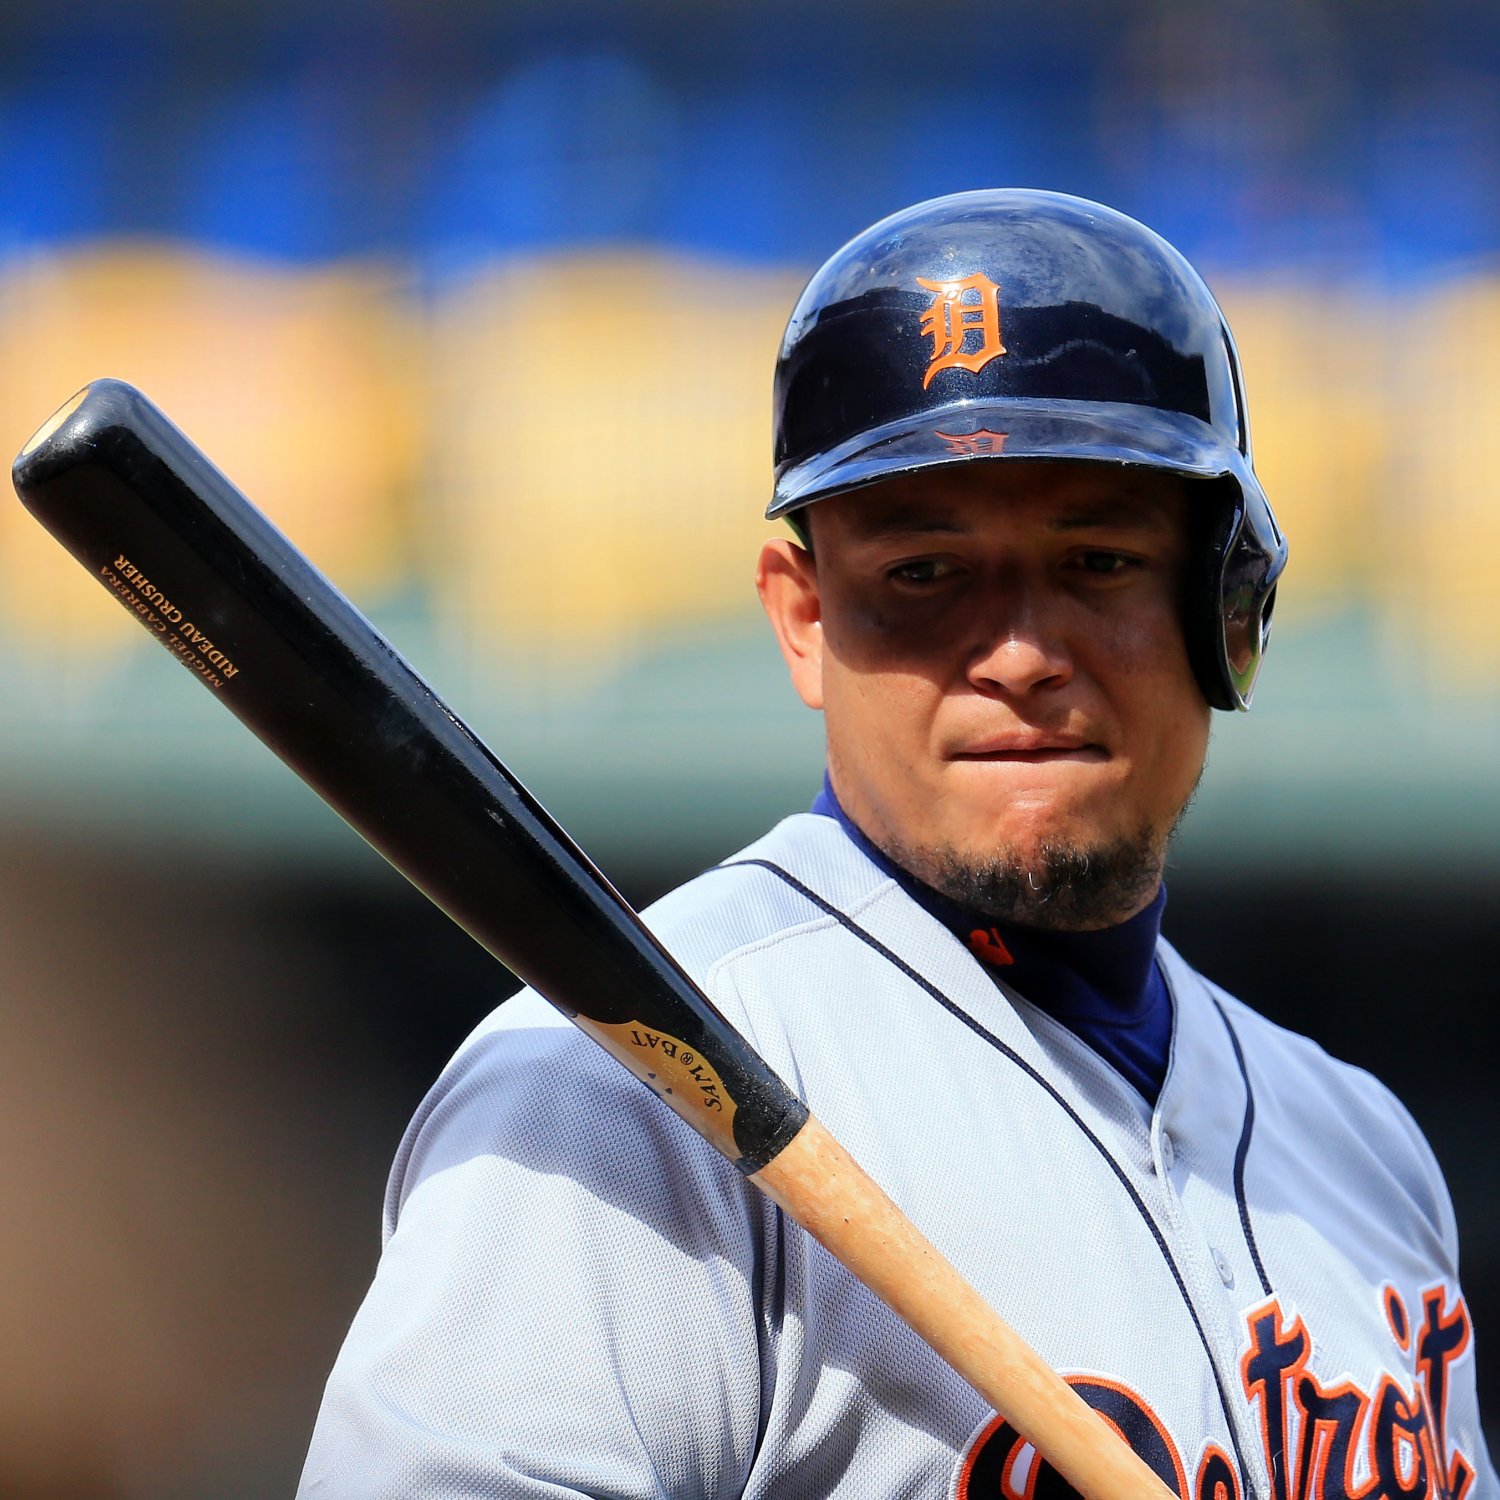 Miguel Cabrera Trade Rumors: Latest News, Speculation on Tigers 1B - Bleacher Report